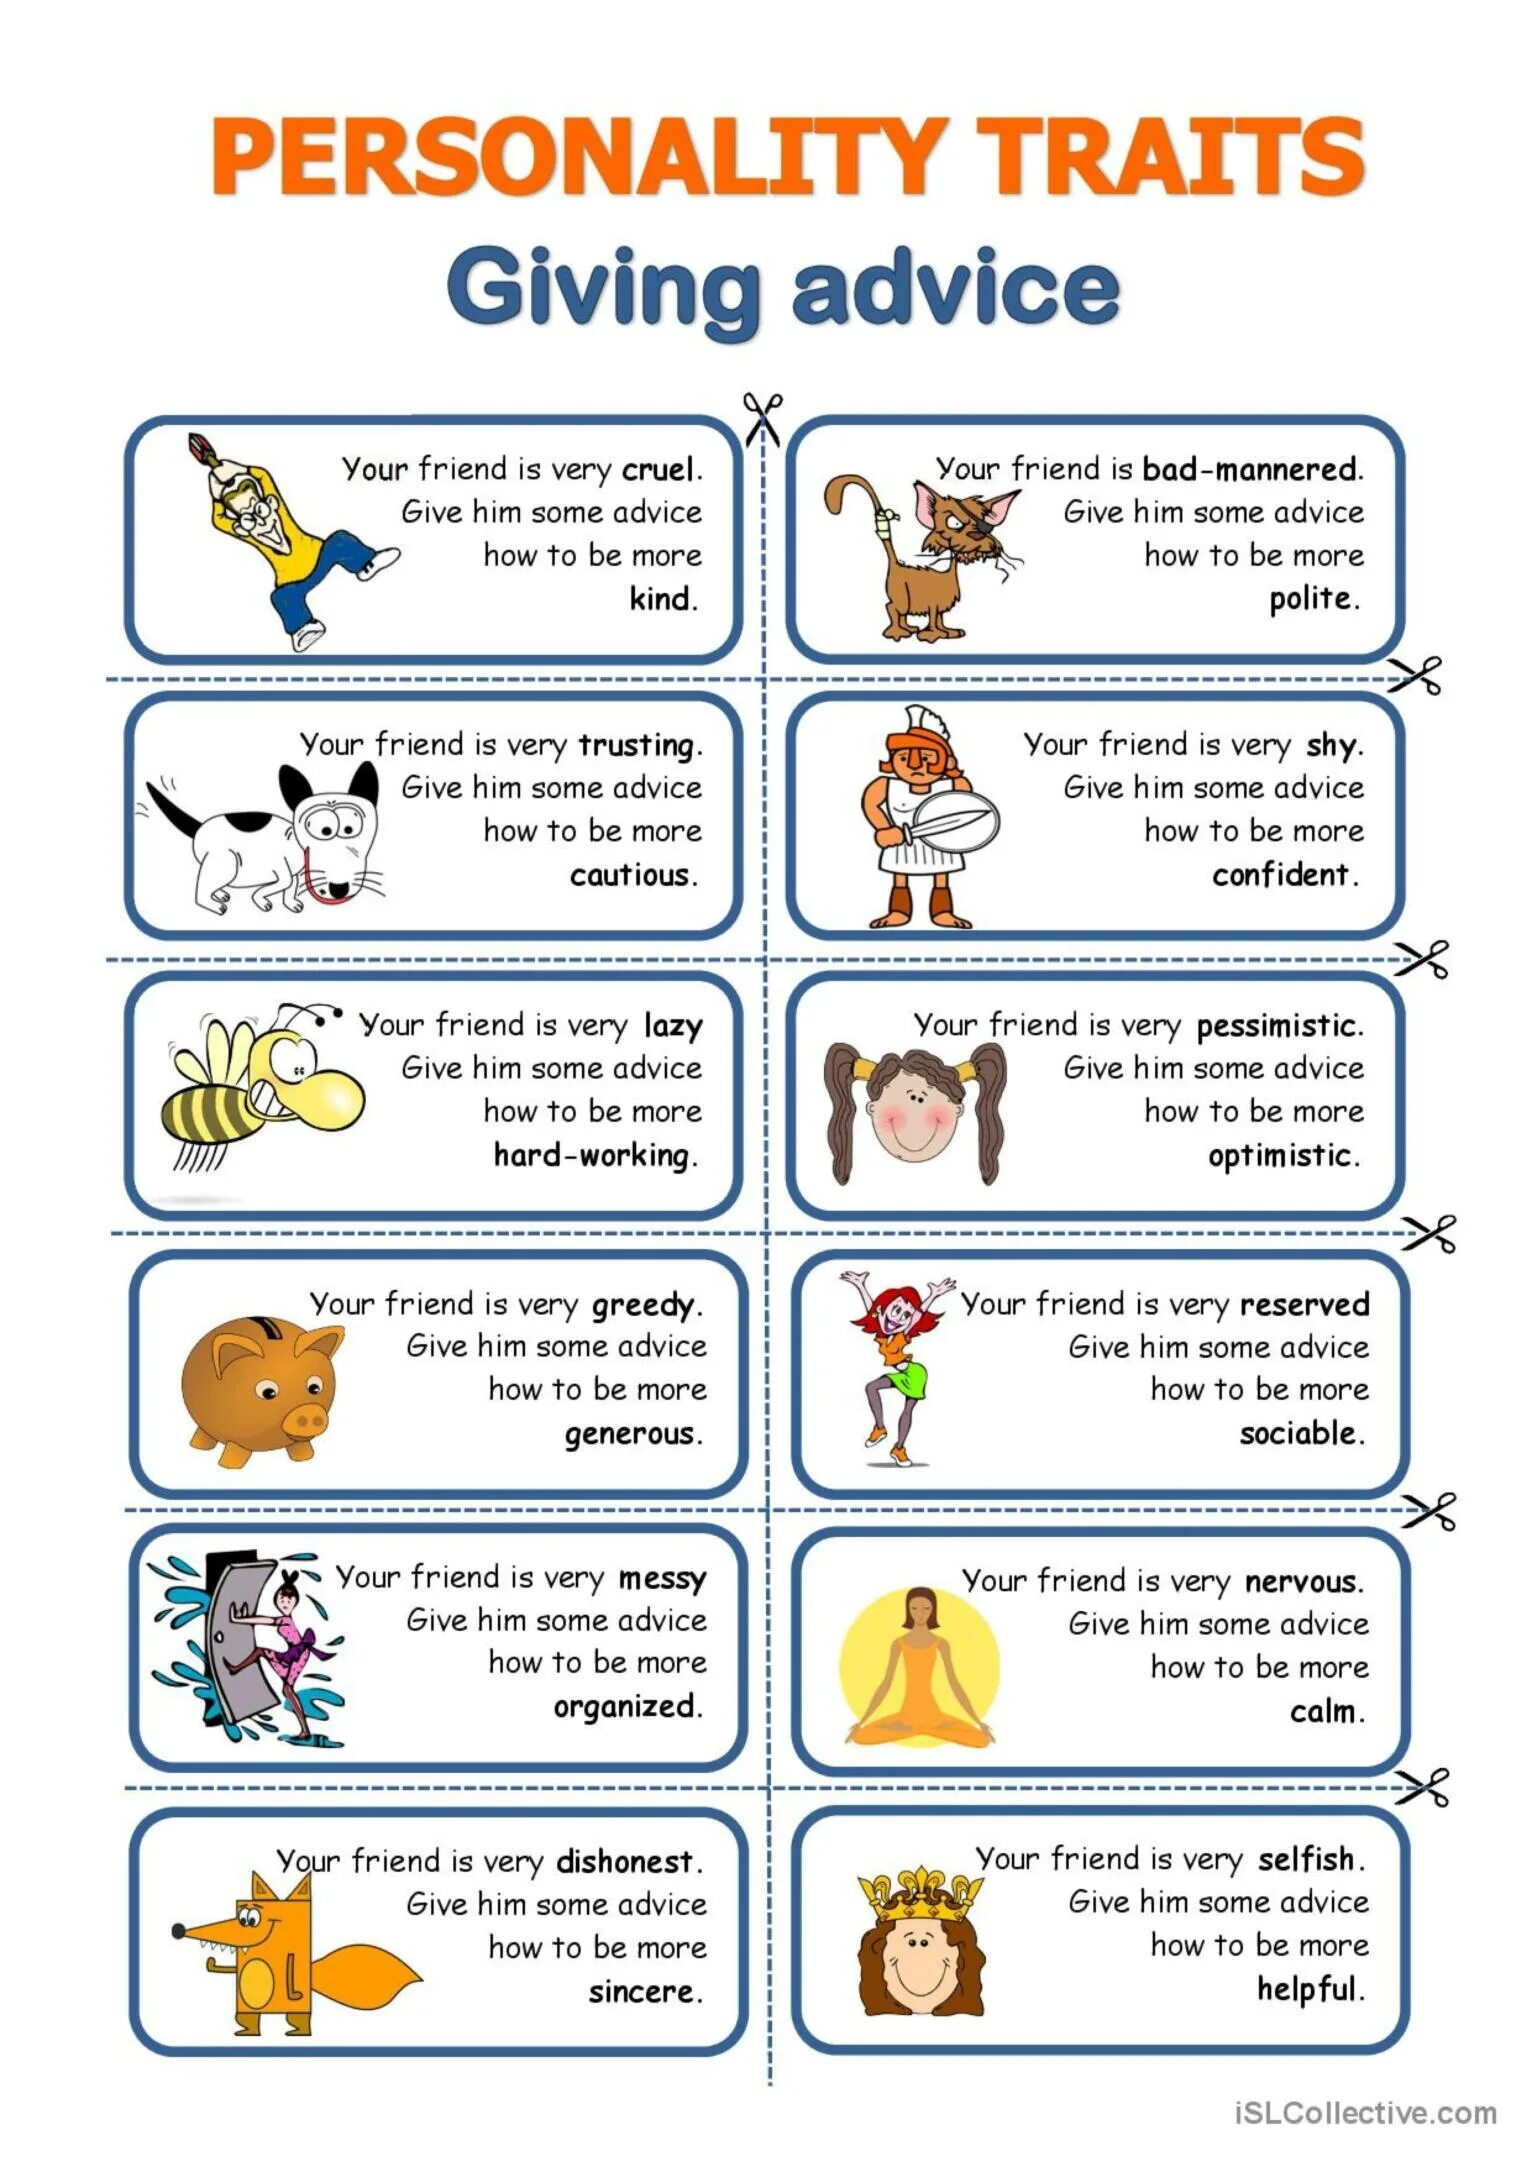 Английский speaking Worksheet. Personality traits giving advice. Speaking Cards английскому языку. Английский язык speaking activity. Asking questions activities